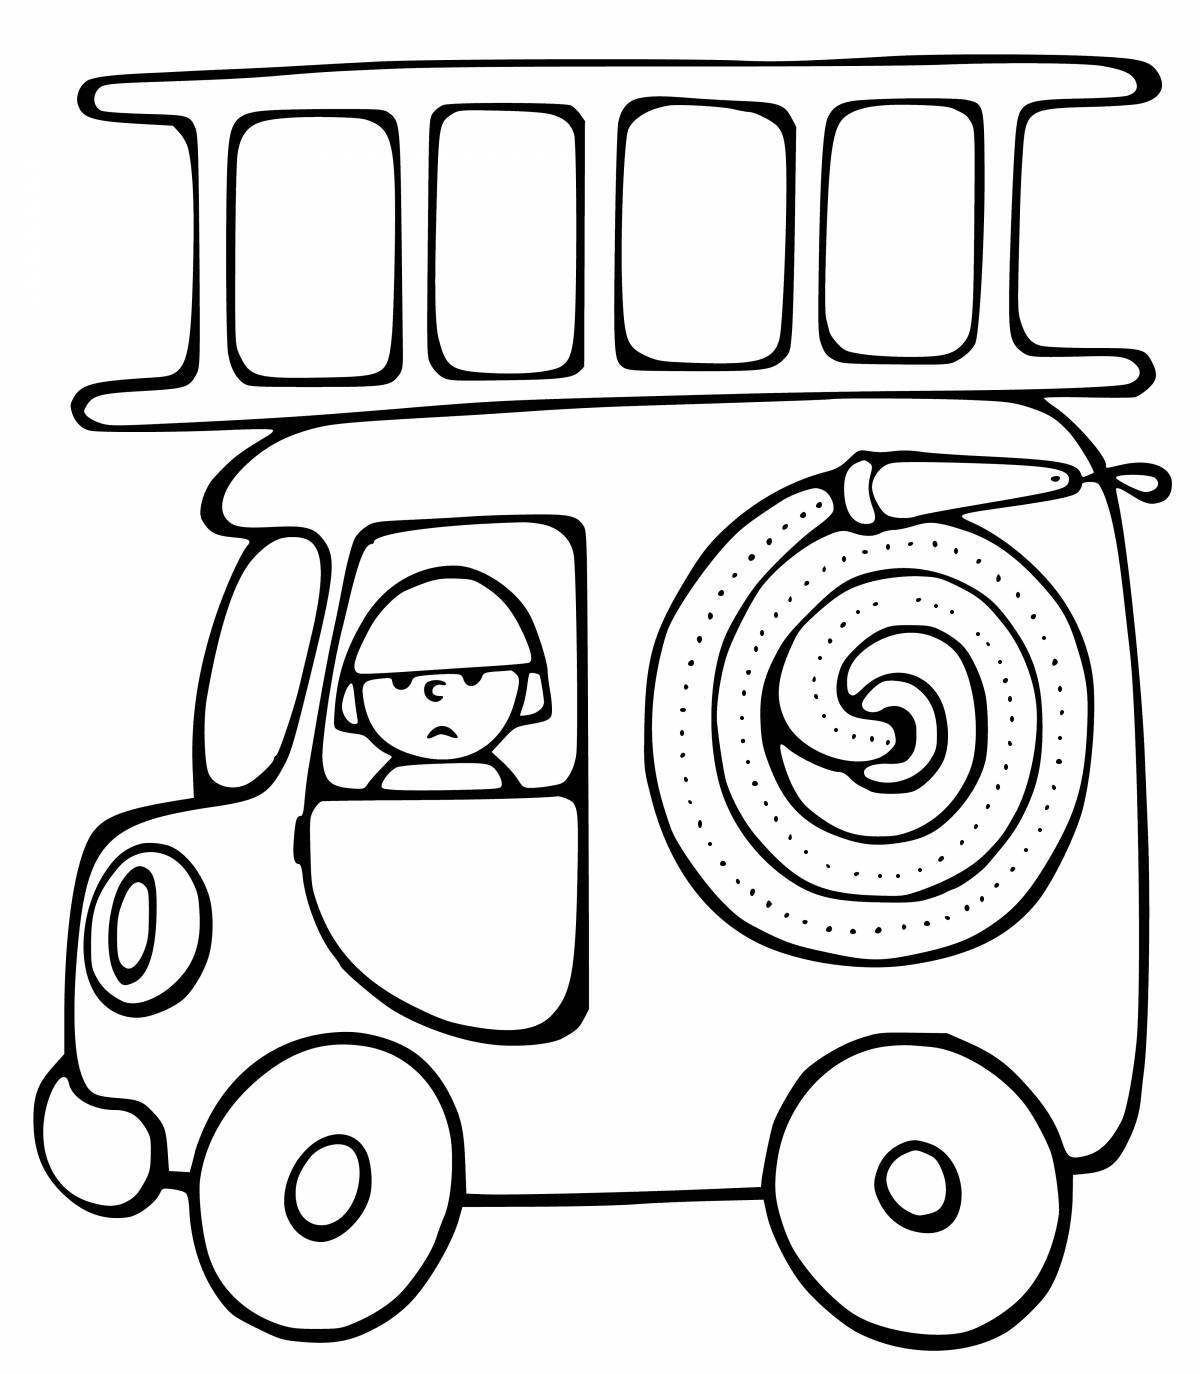 Fantastic fire truck coloring book for kids